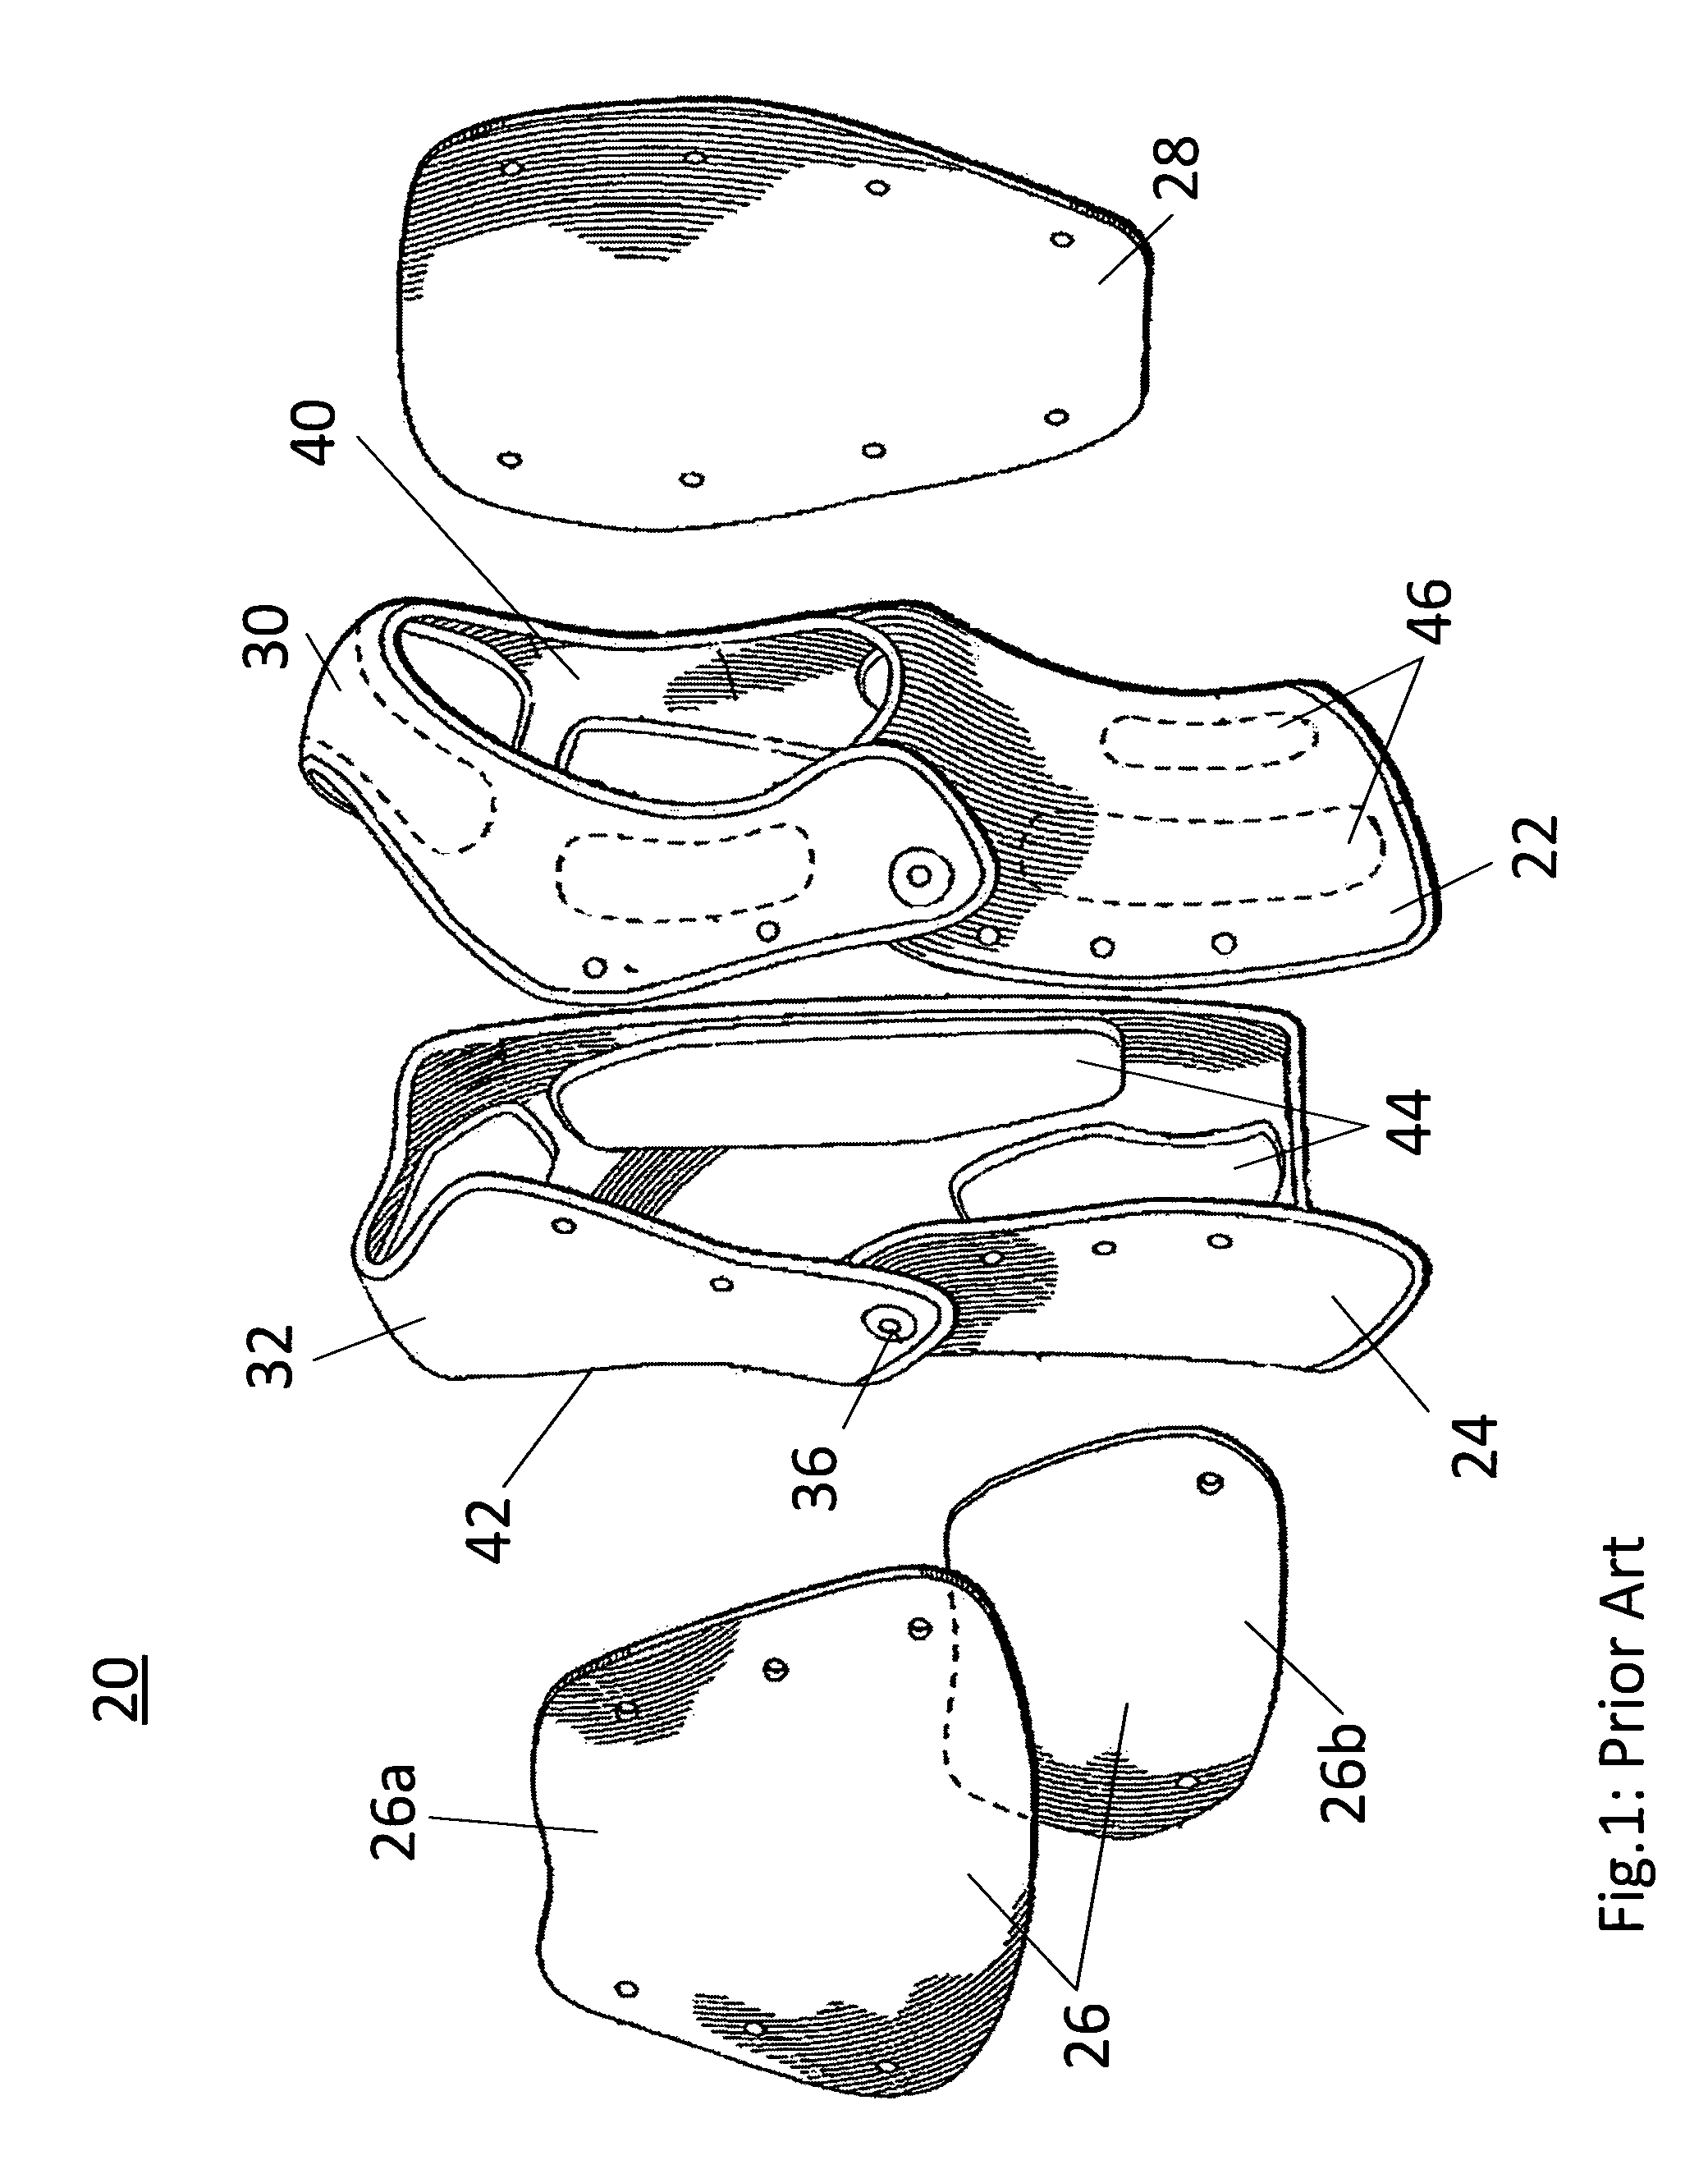 Articulated body armour